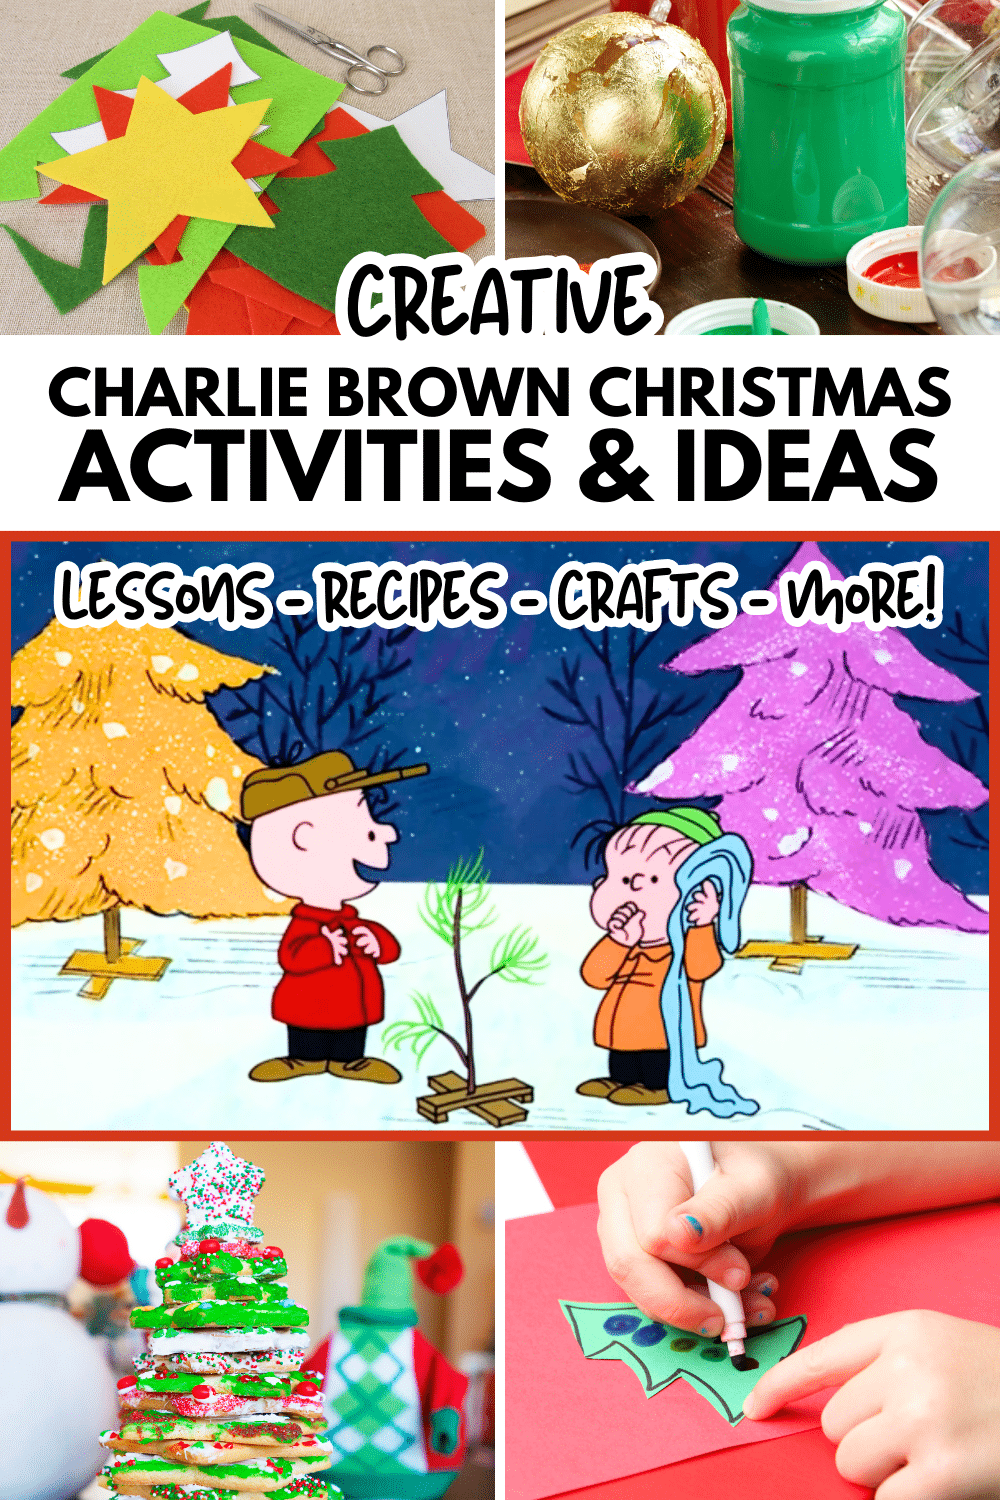 Charlie Brown Christmas Themed Activities for Kids (FUN HOLIDAY IDEAS) - different Charlie Brown Christmas crafts and Charlie Brown Christmas recipes with text over the Christmas pictures